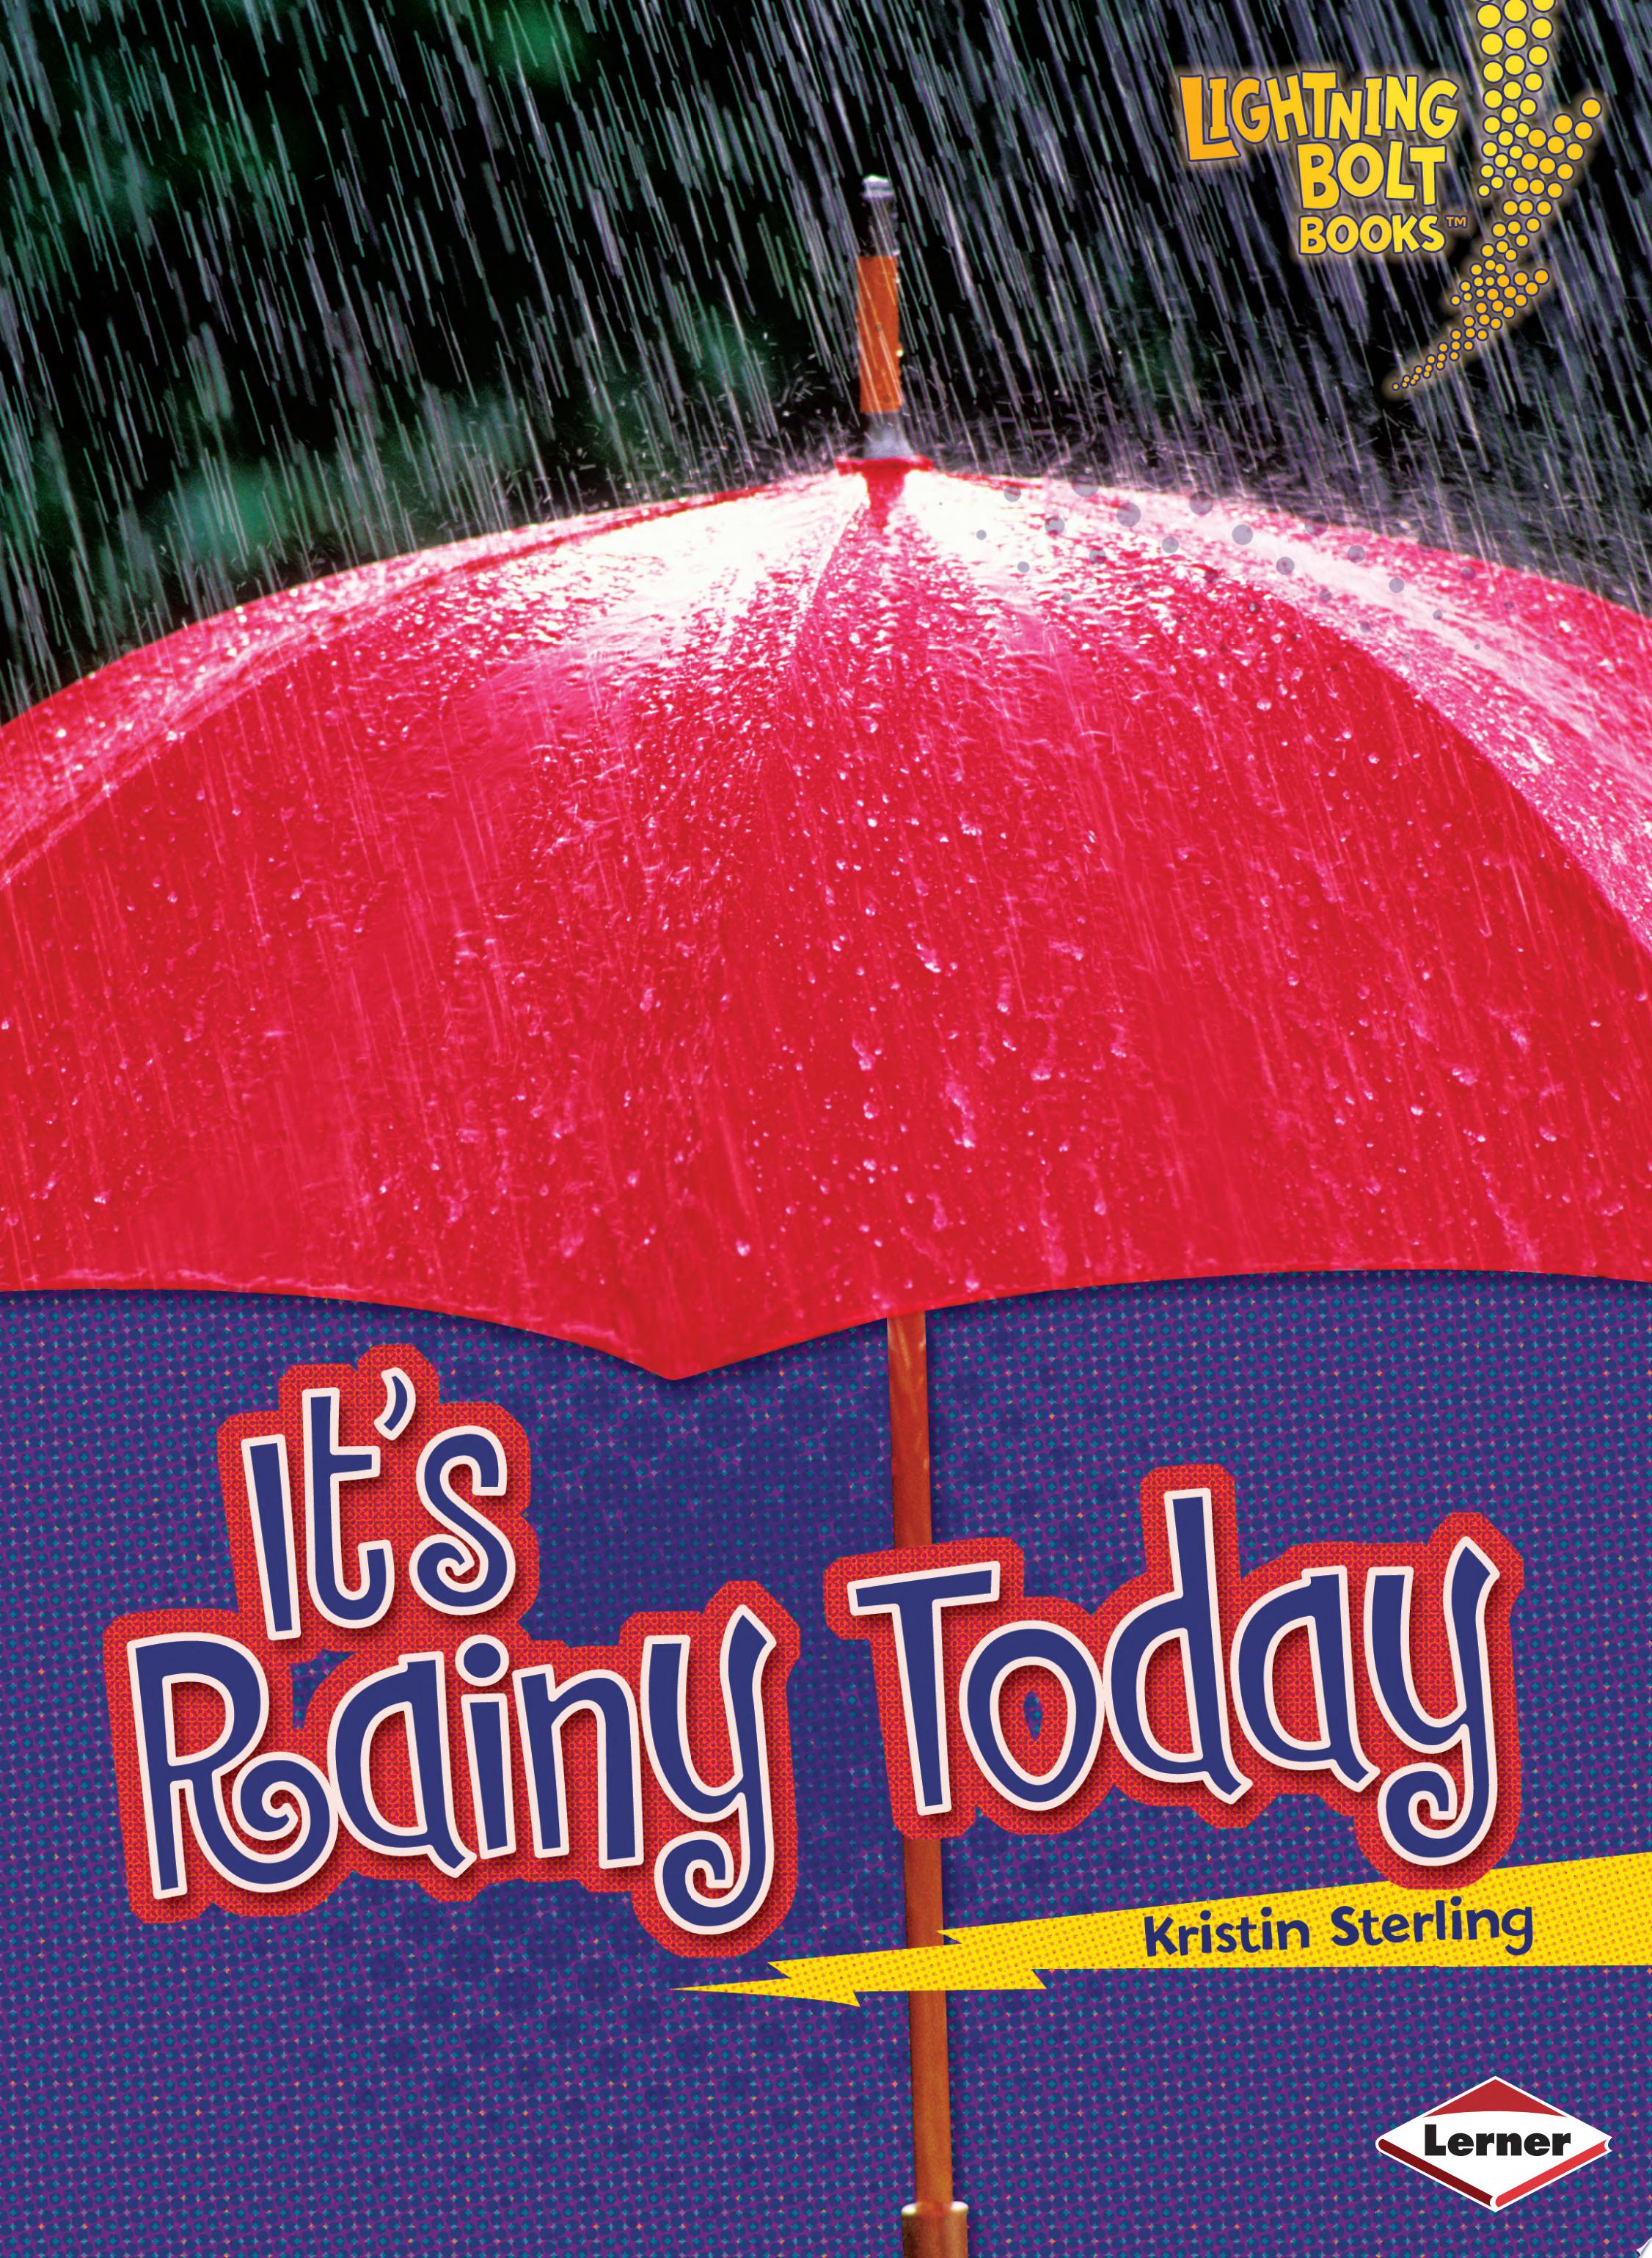 Image for "It's Rainy Today"